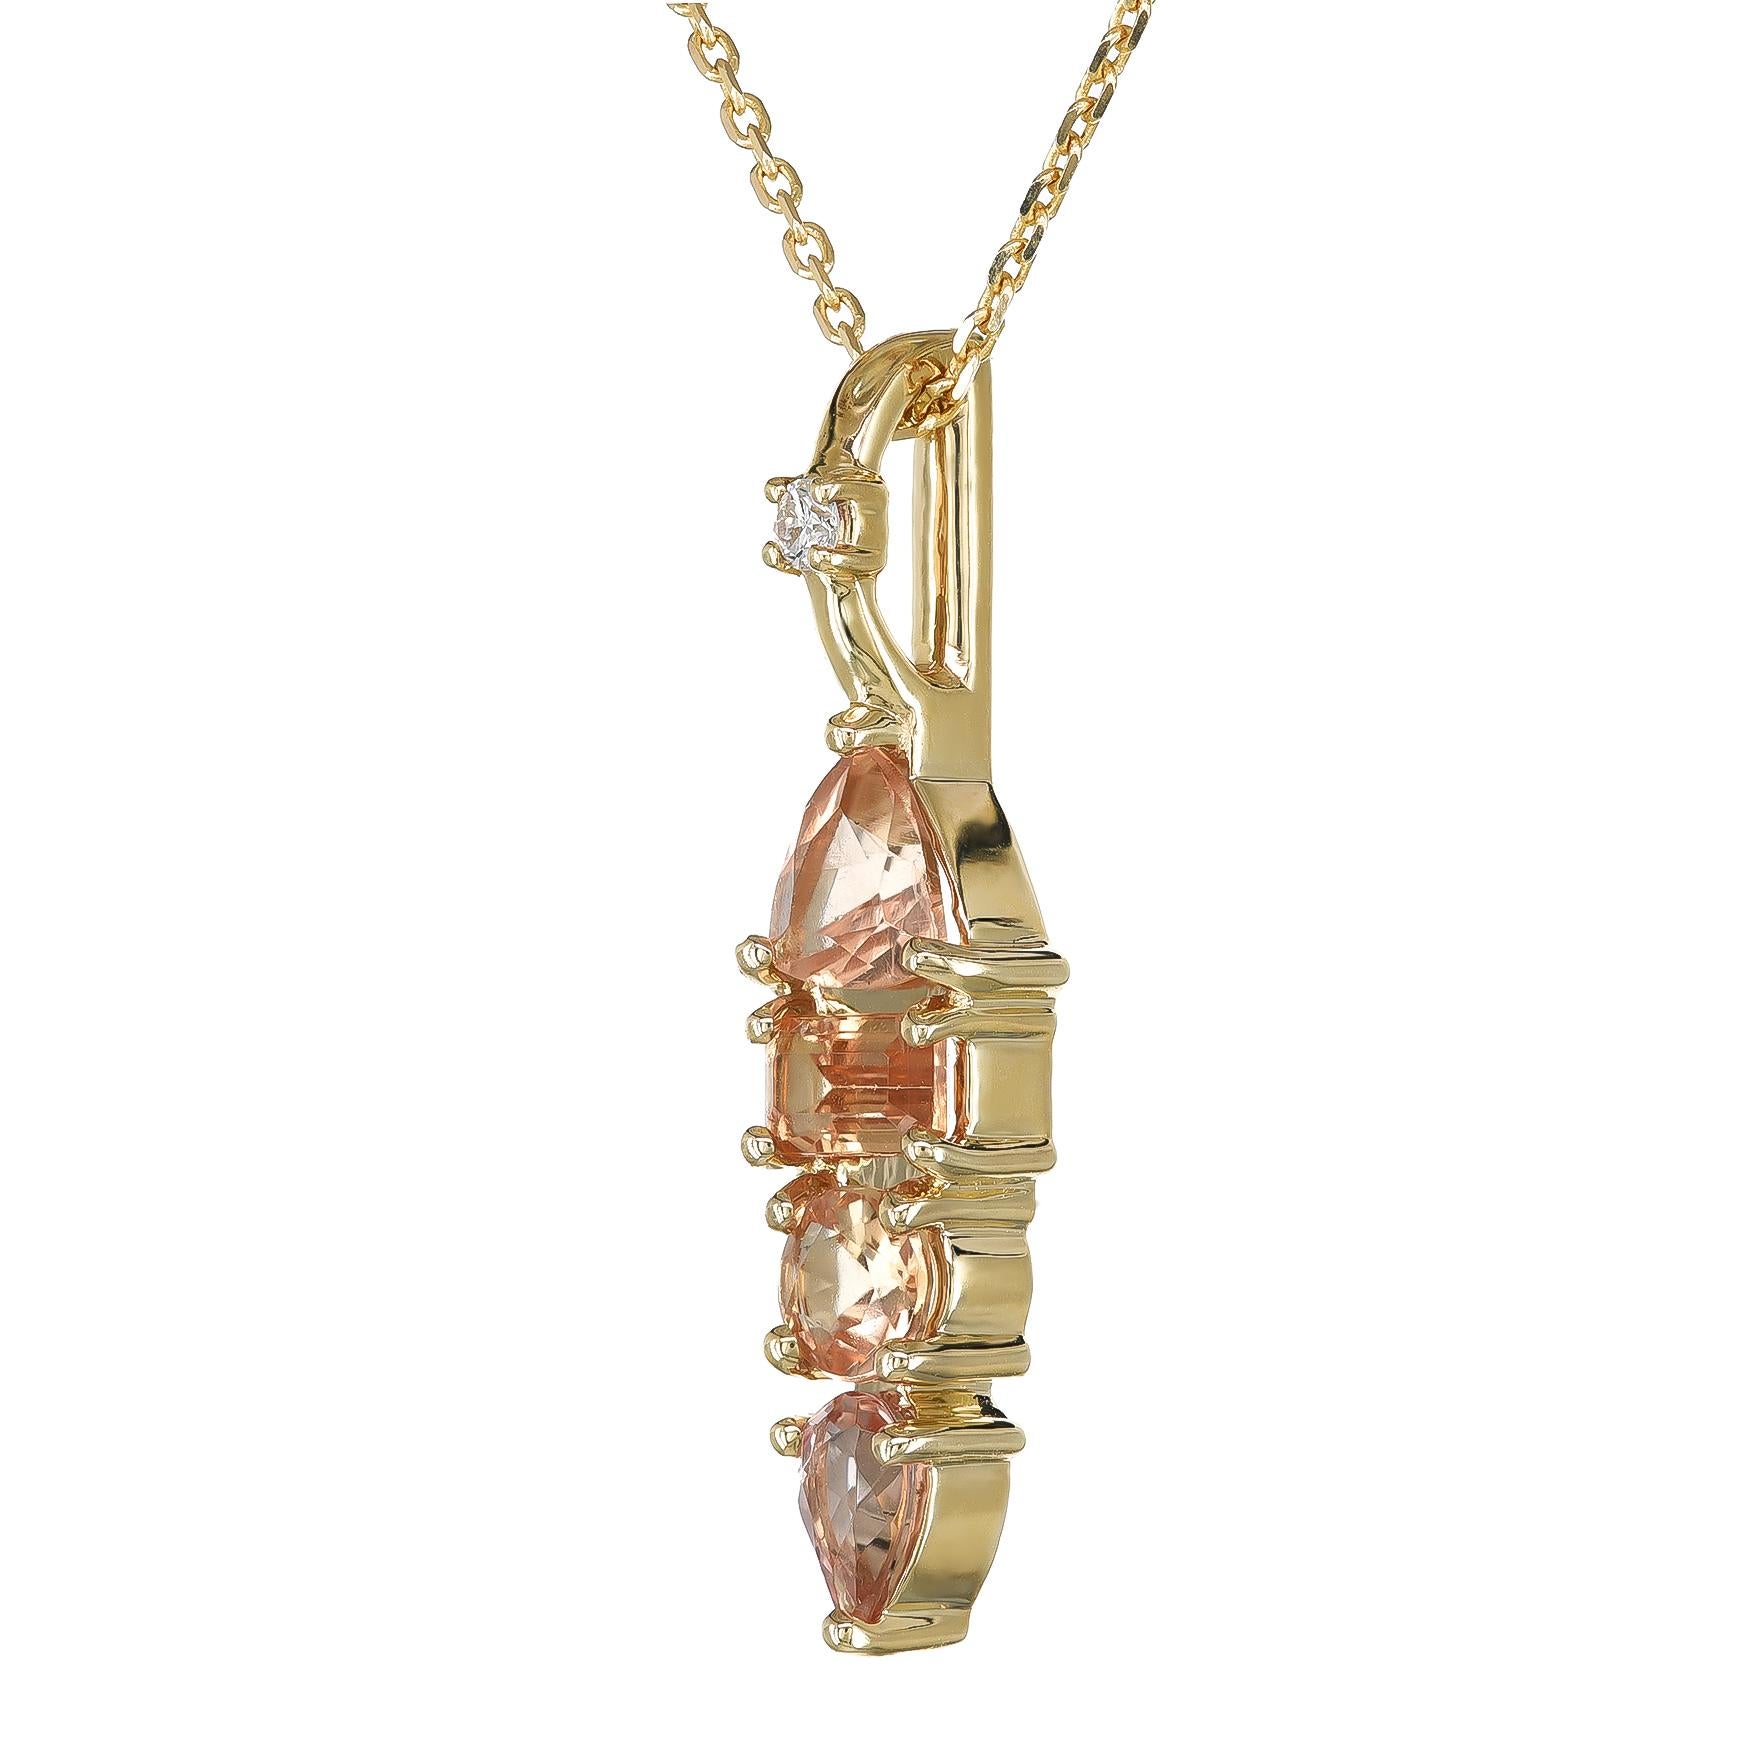 Step into the world of luxury with the radiant Imperial Topaz, majestically set in a 14K yellow gold pendant. Known for its distinctive reddish-orange hue, this gemstone is a treasure for its rarity and the warm, fiery vibrance it adds to any